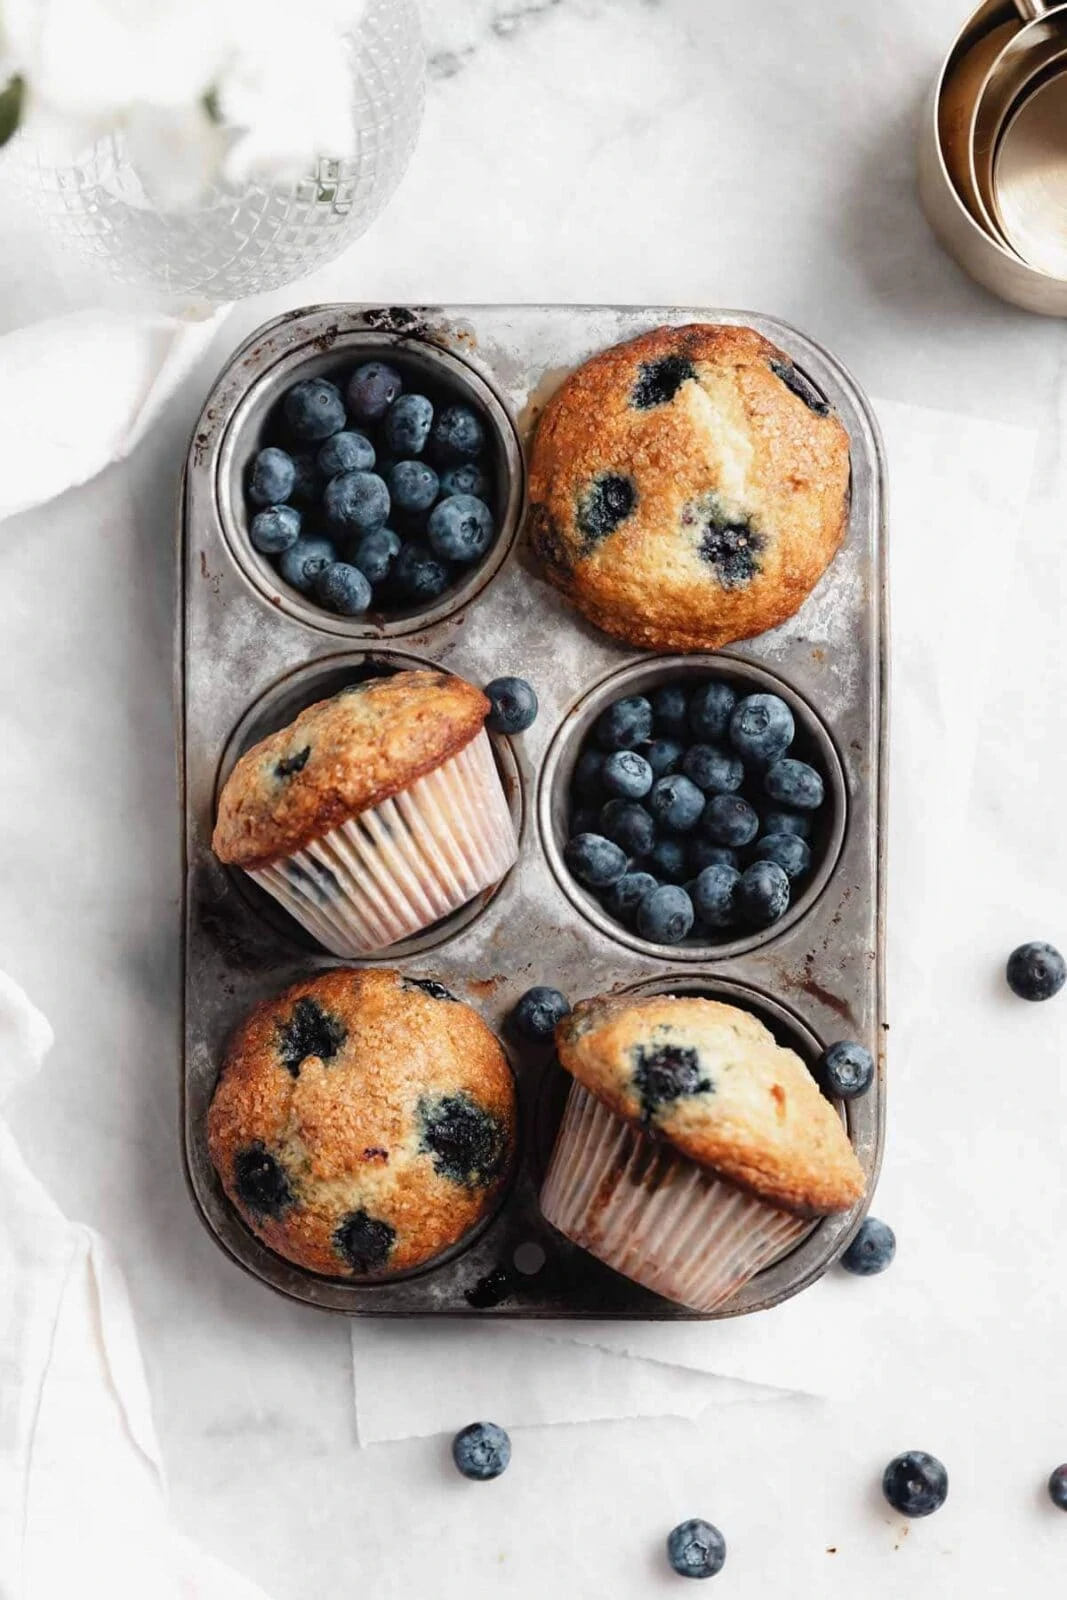 https://bromabakery.com/wp-content/uploads/2020/03/Blueberry-Muffins-2-1067x1600.webp